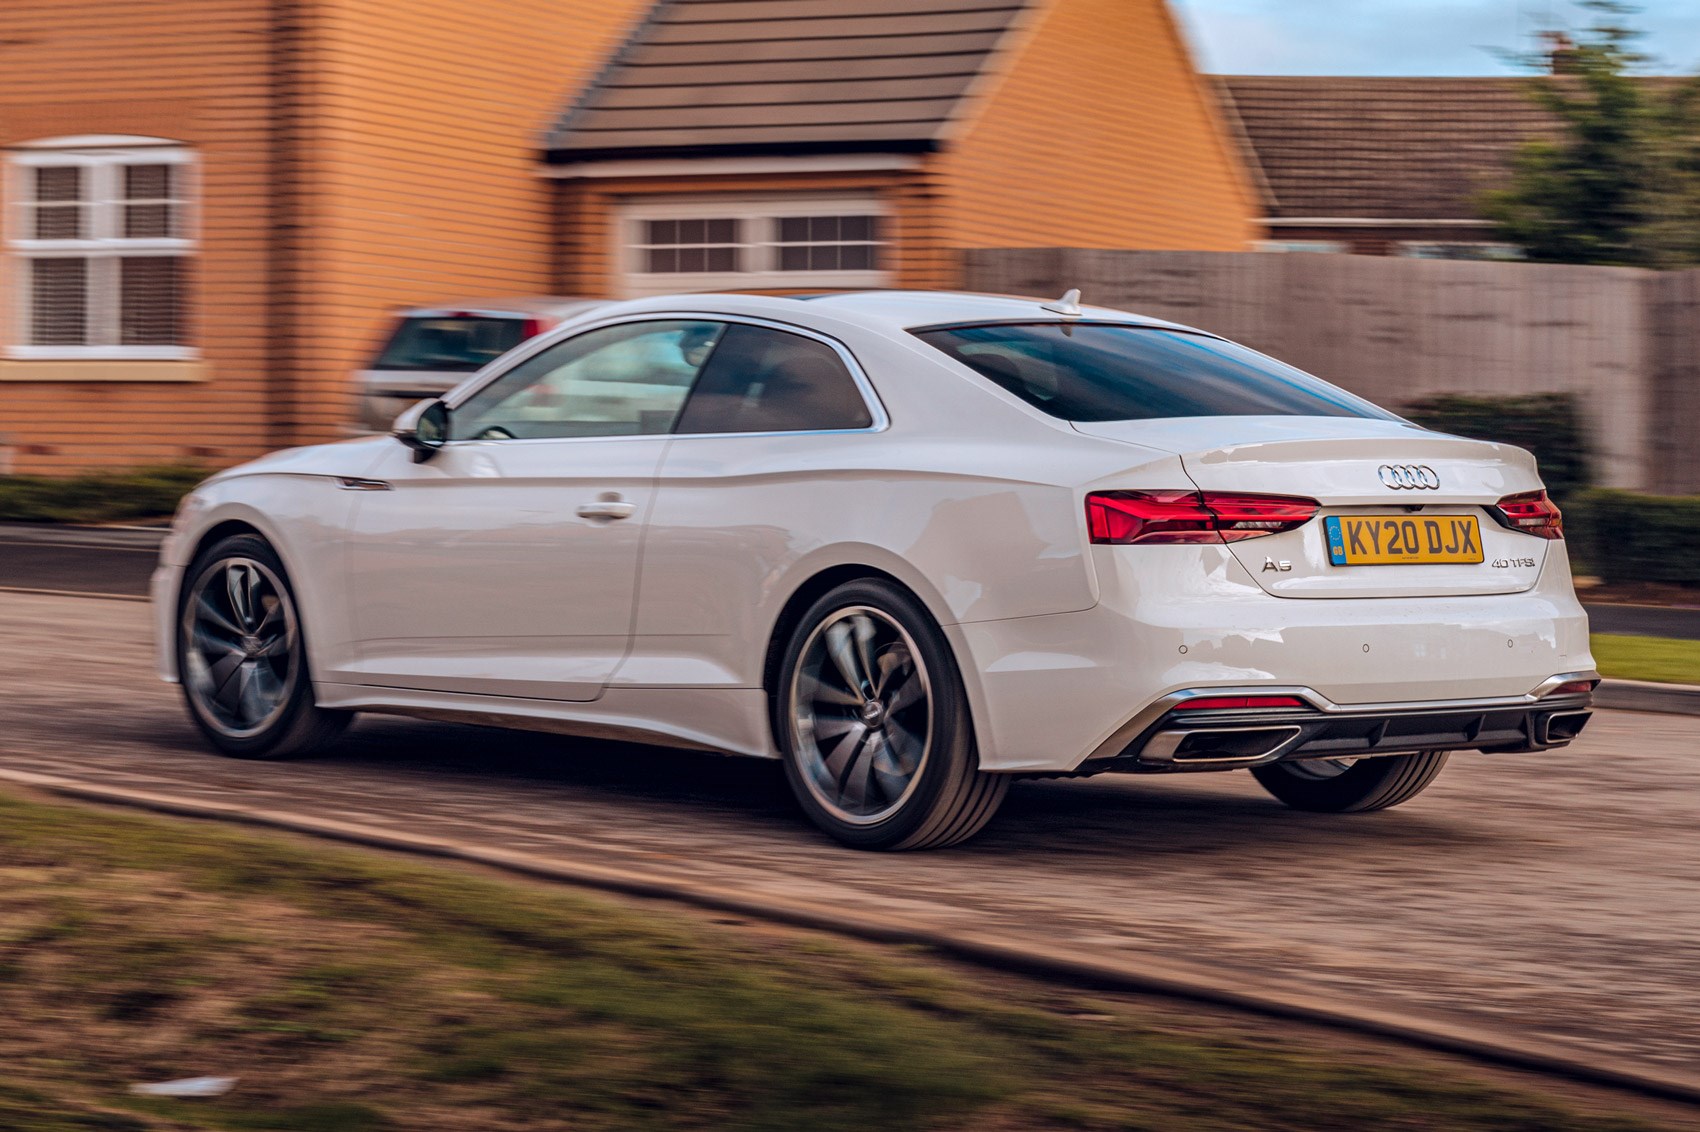 New Audi A5 Model Review